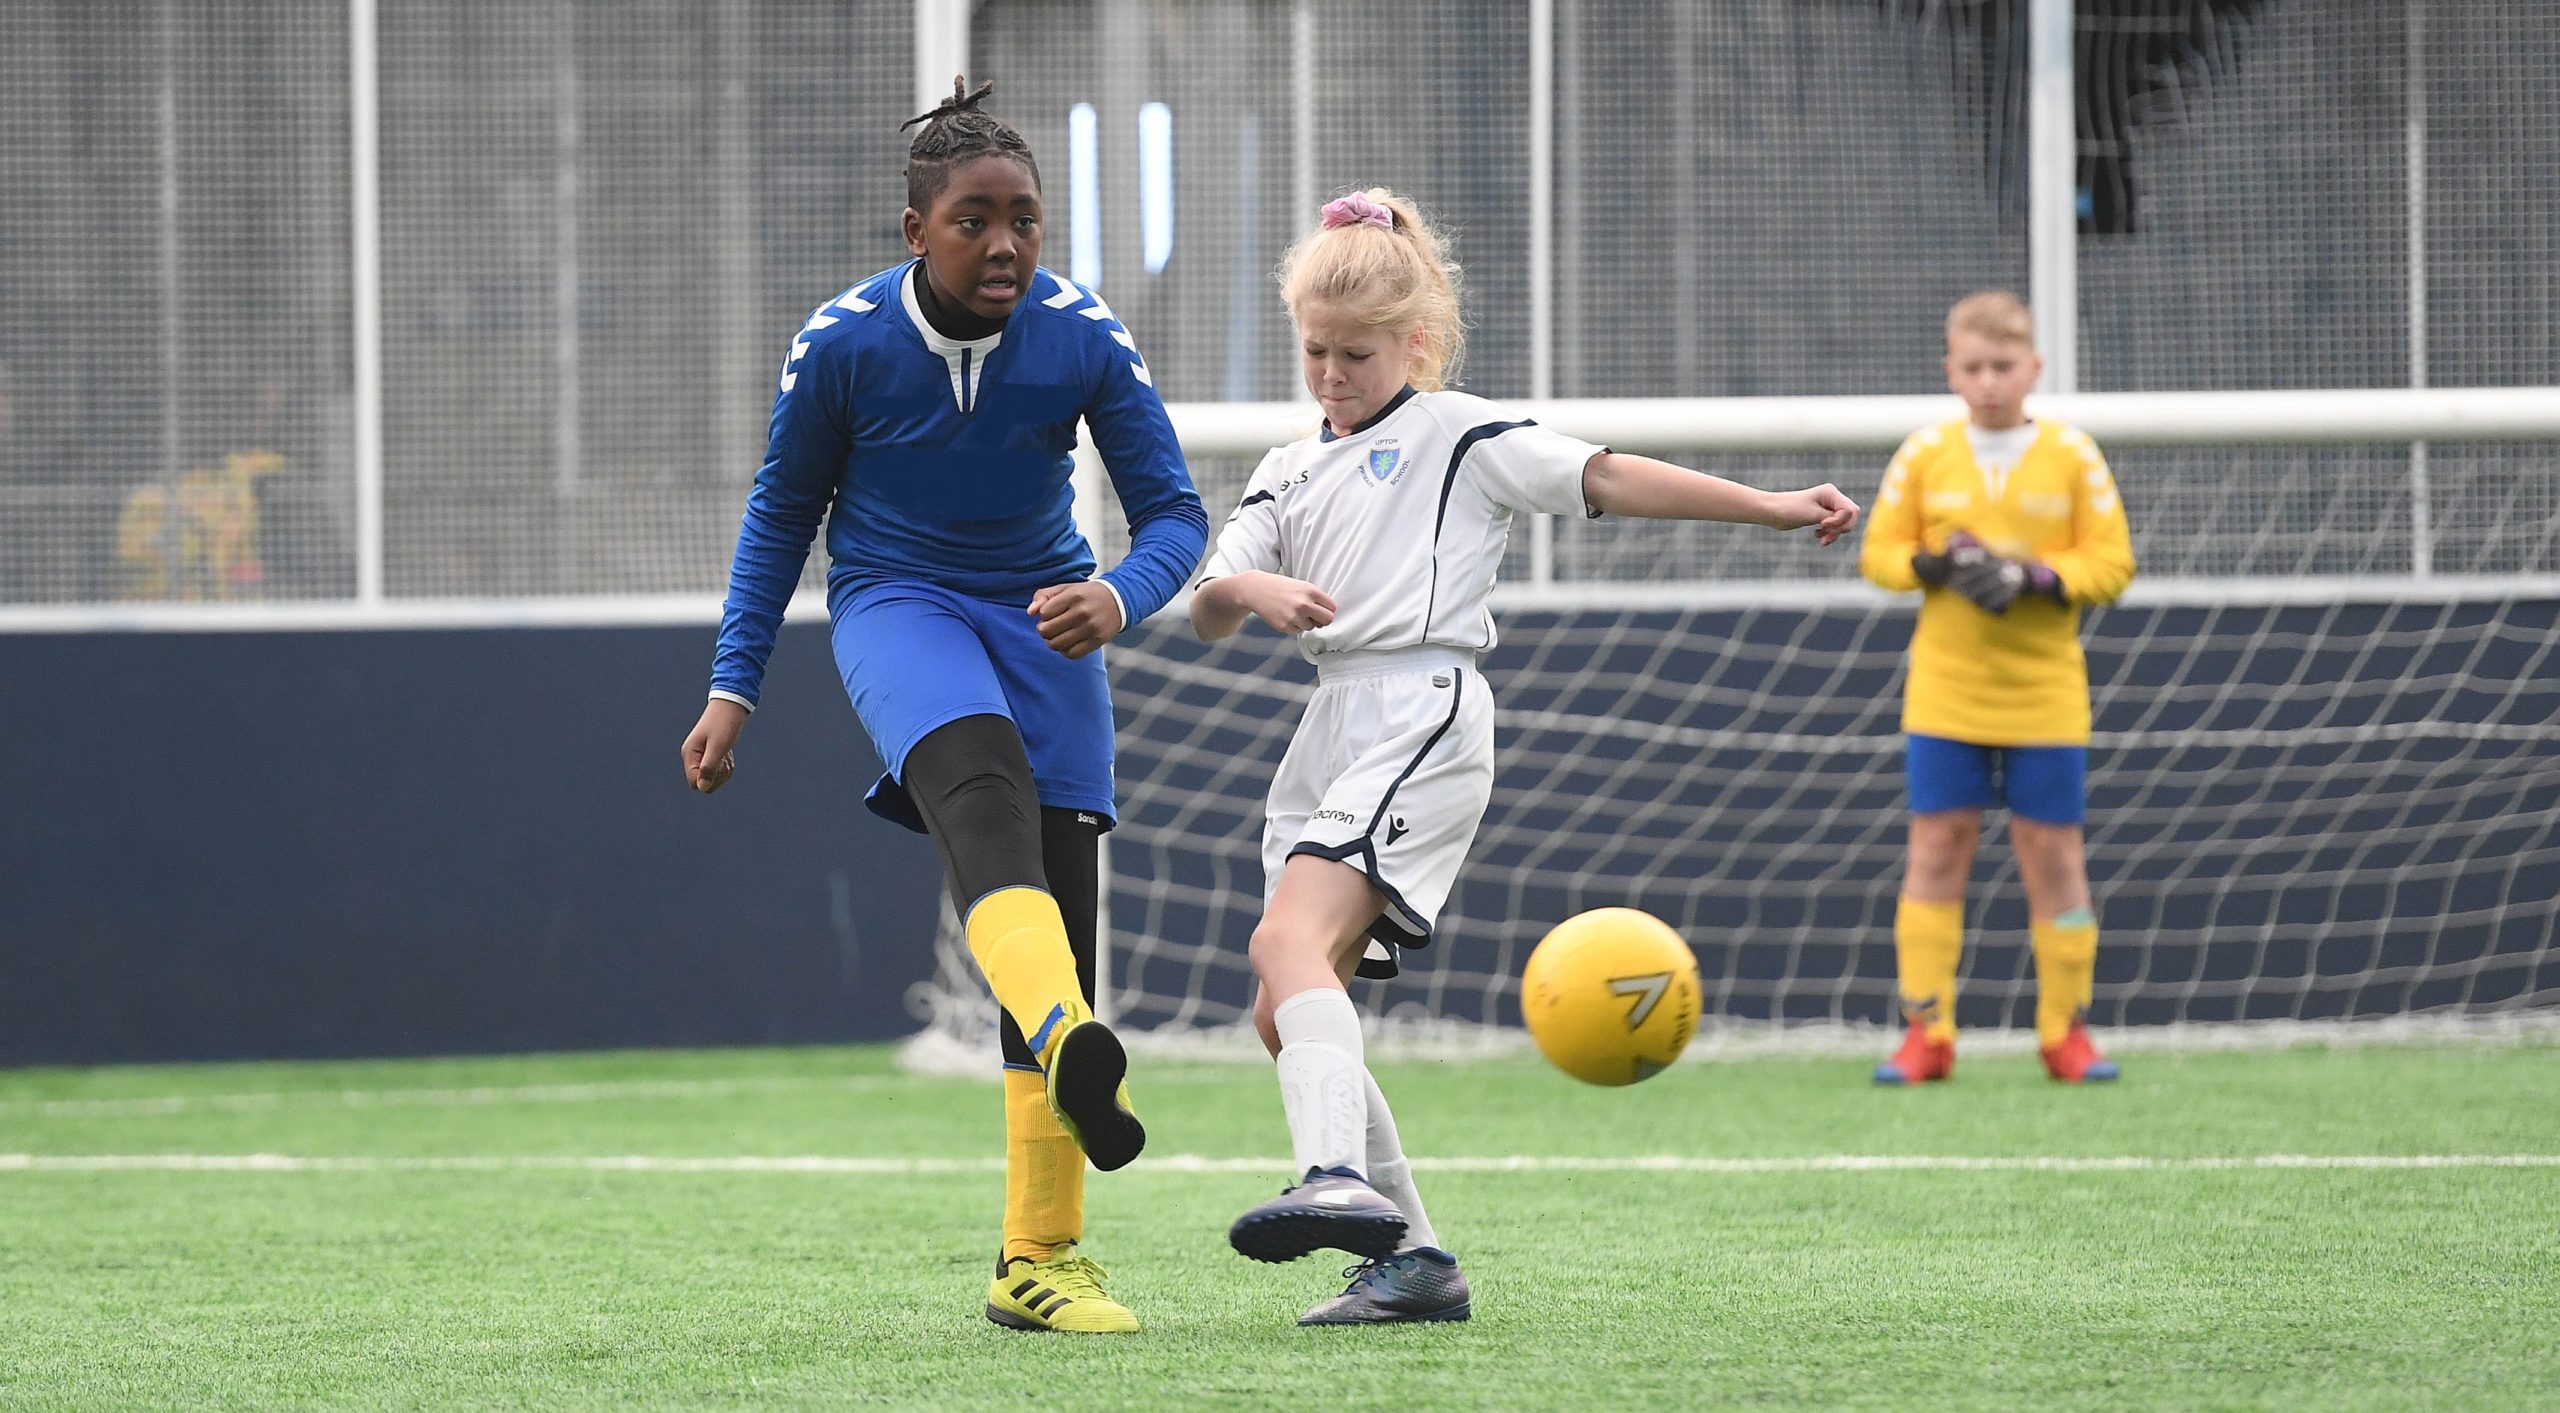 Millwall Community Trust joins thirteen professional clubs to get girls active across London